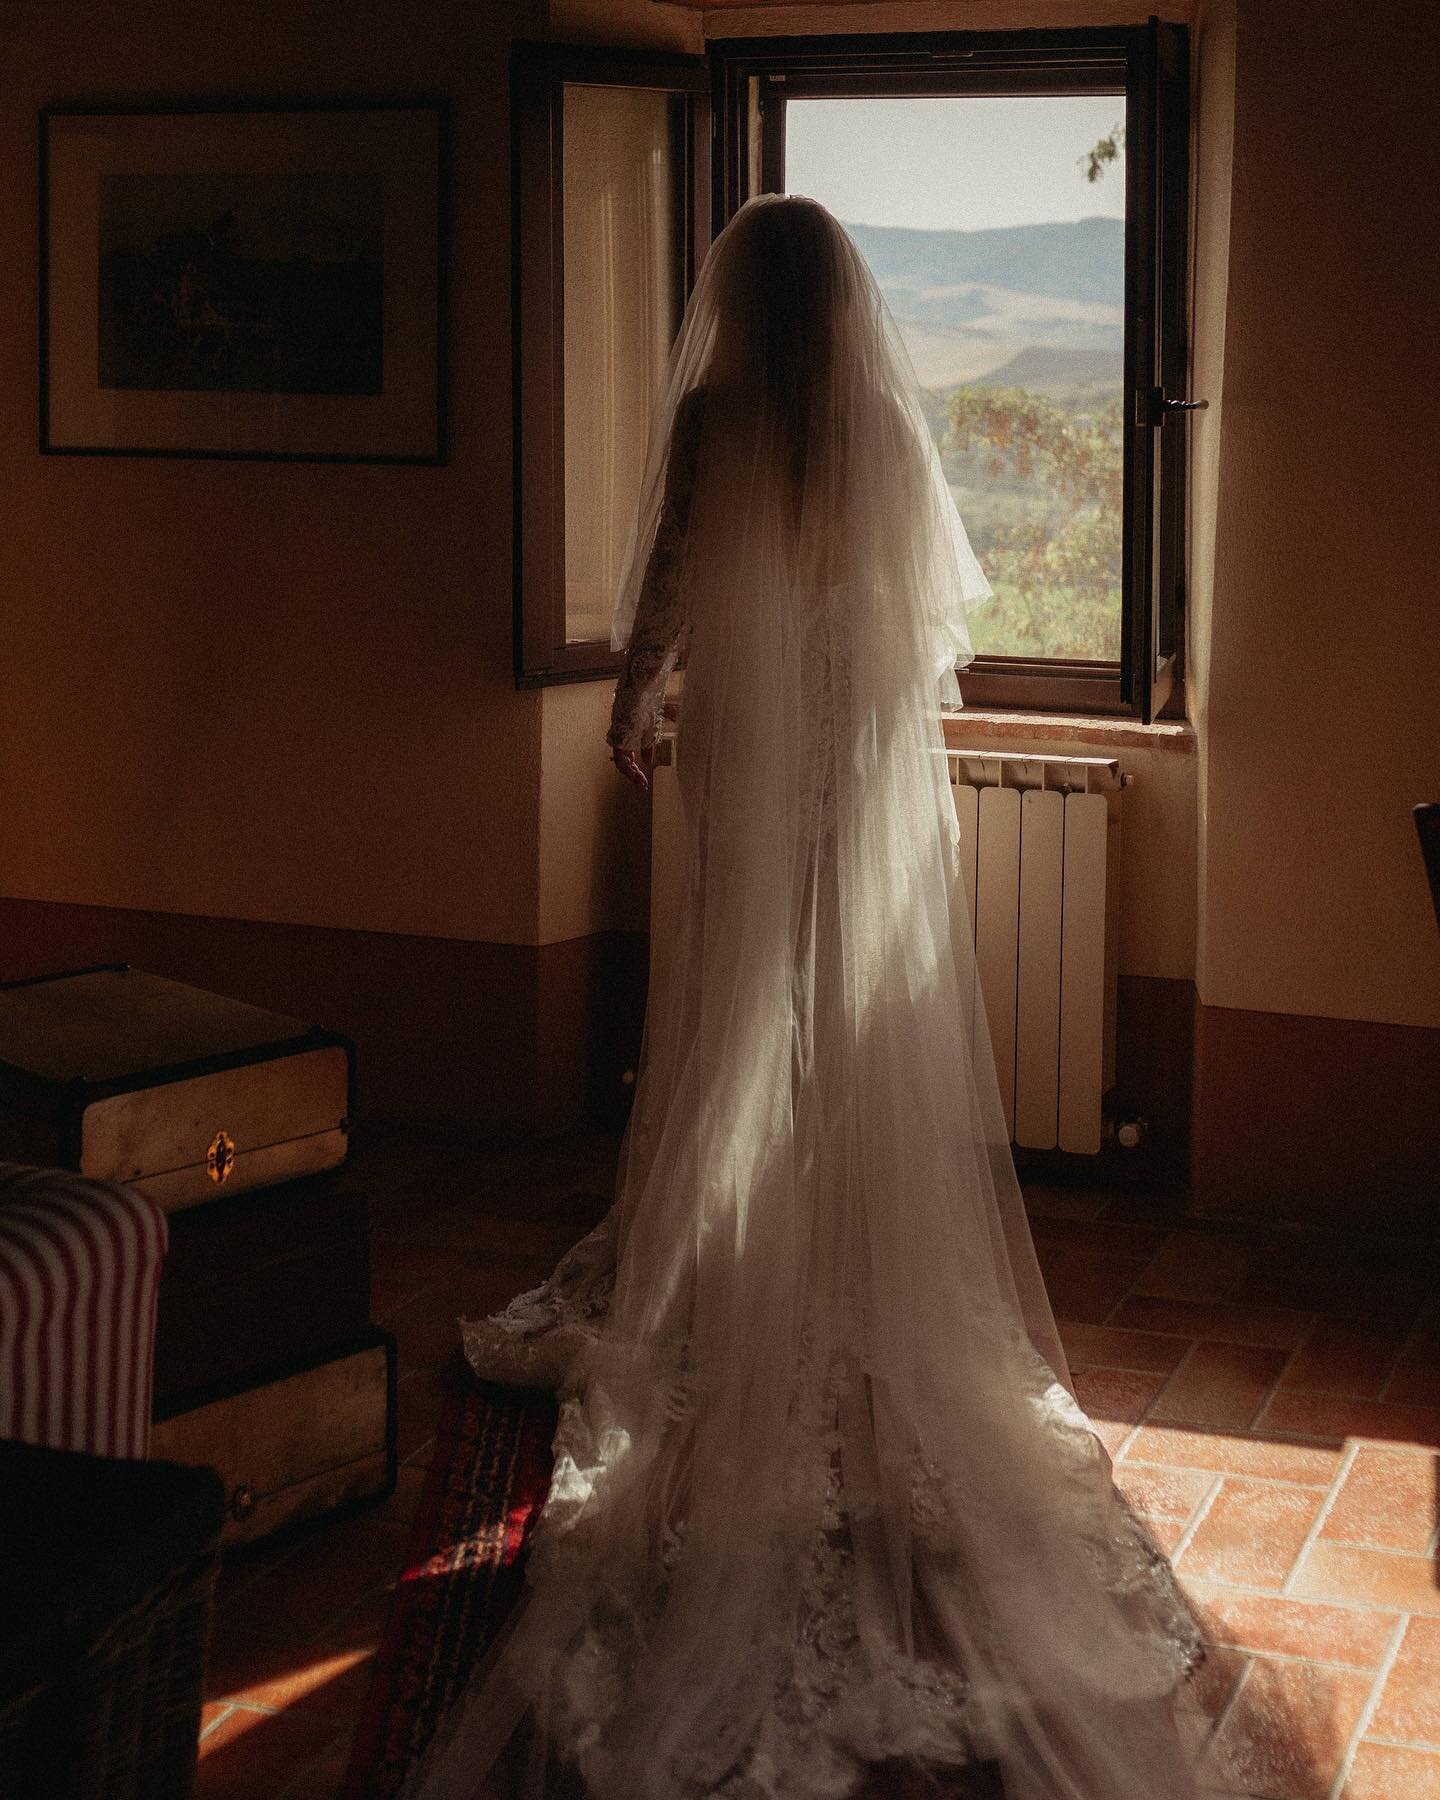 4/4 &bull; Wedding Day. 
Borgo di Castelvecchio, you&rsquo;ve outdone yourself. 

My younger self would be so proud. Working two jobs (as a nurse and photographer) and spending countless hours trying to teach myself editing software that might as wel